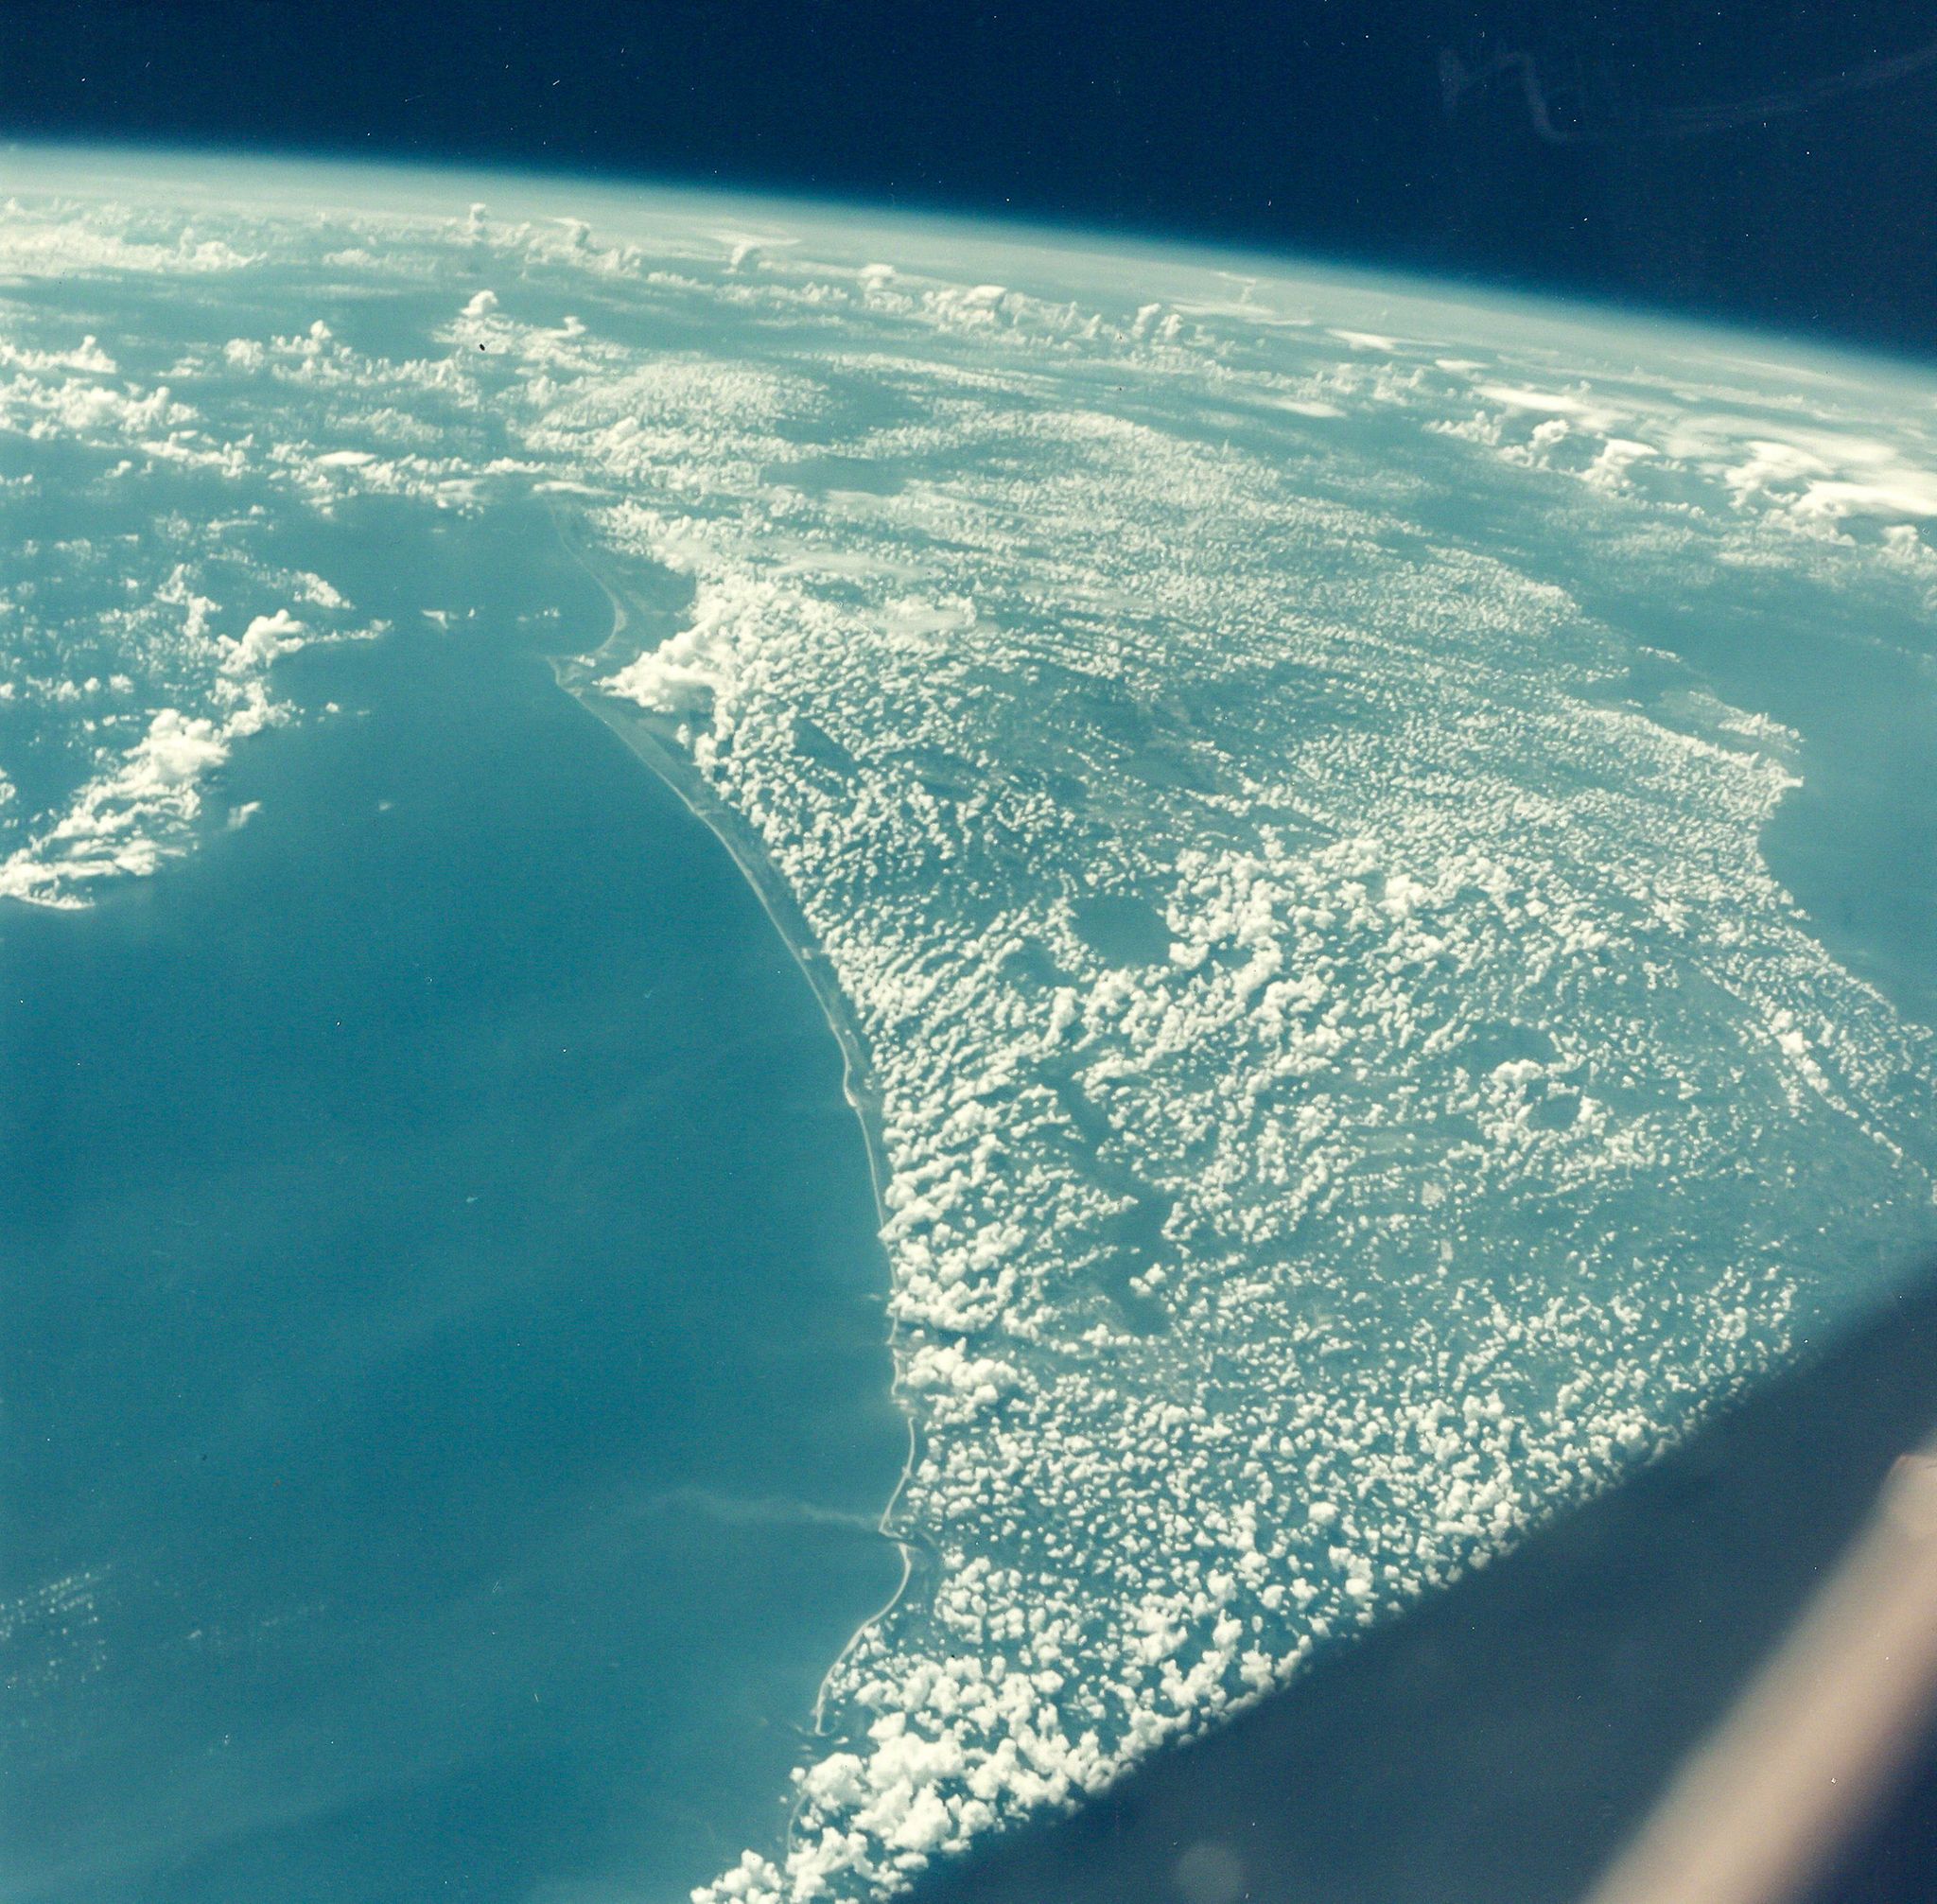 Florida and Cape Kennedy seen during different orbits, Gemini 5, August 1965 Three vintage